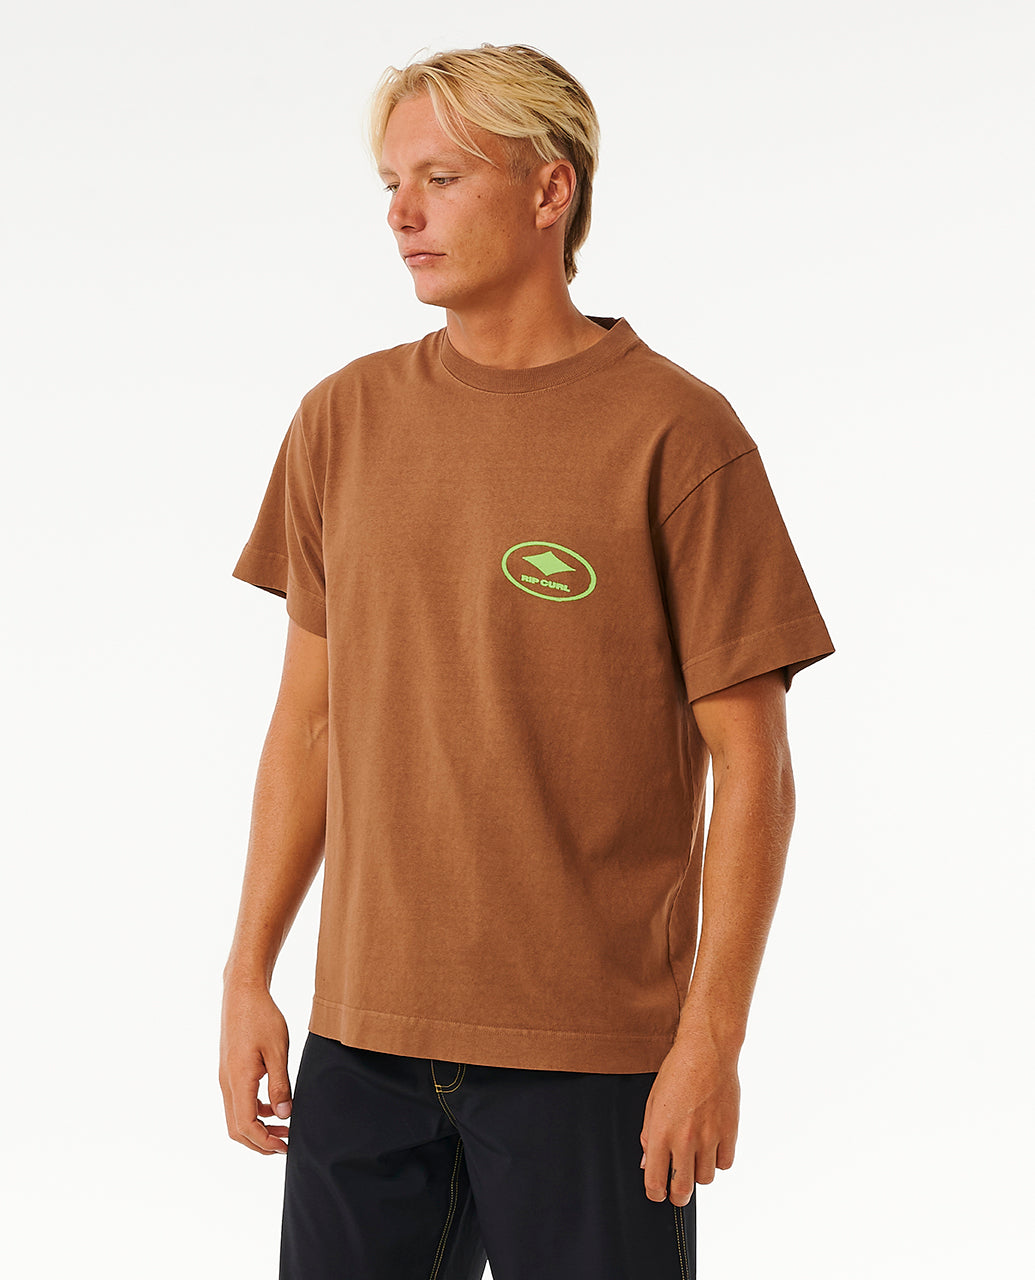 Rip Curl Men Quality Surf Products Oval Tee 0EQMTE